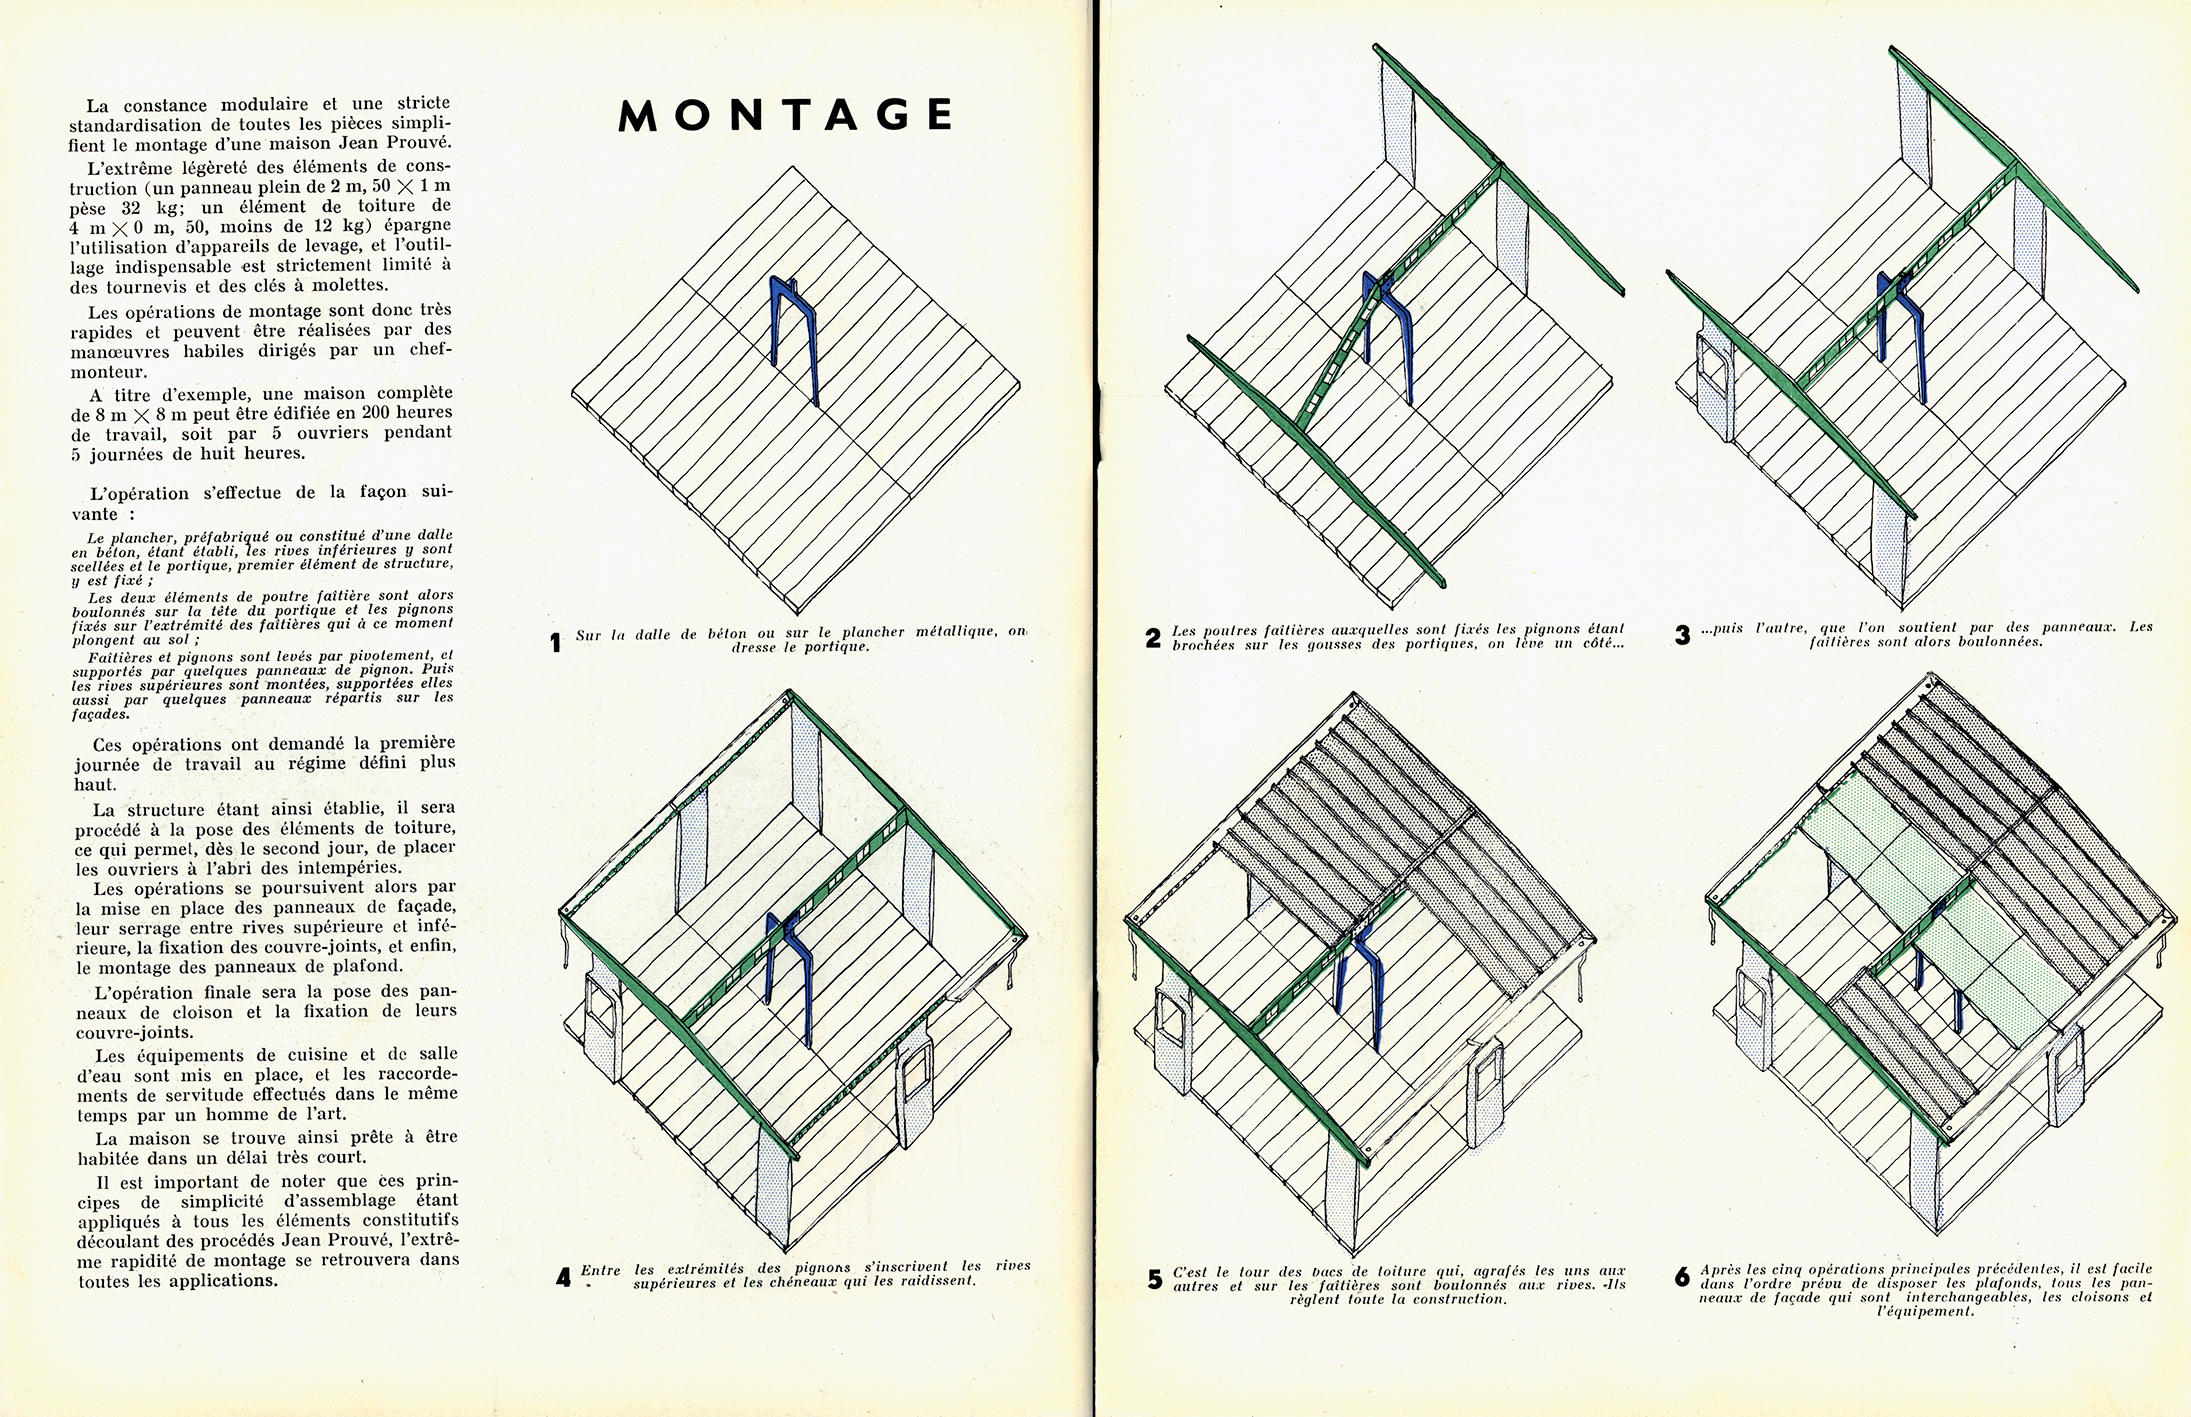 “Methods of construction, types of housing created by the Ateliers Jean Prouvé”. Advertising brochure for the Ateliers Jean Prouvé Studal, Paris, ca. 1950.